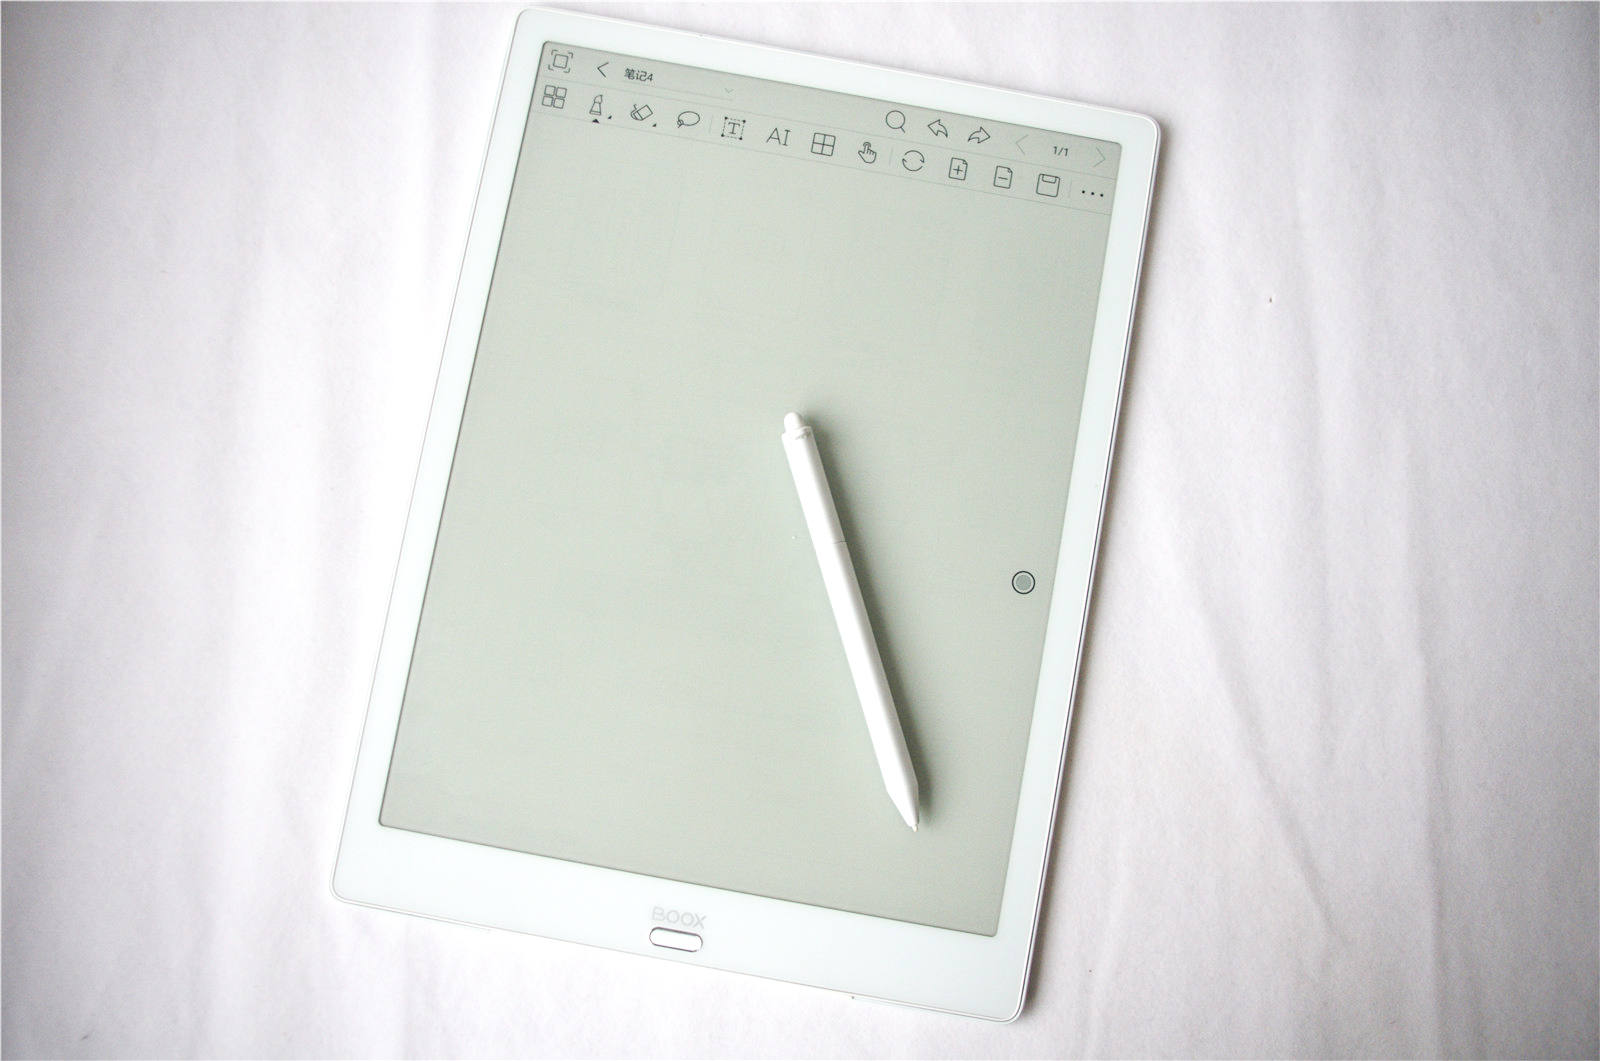 Aragonite Smart Ink Tablet Review: With it, books, paper and pen can be discarded